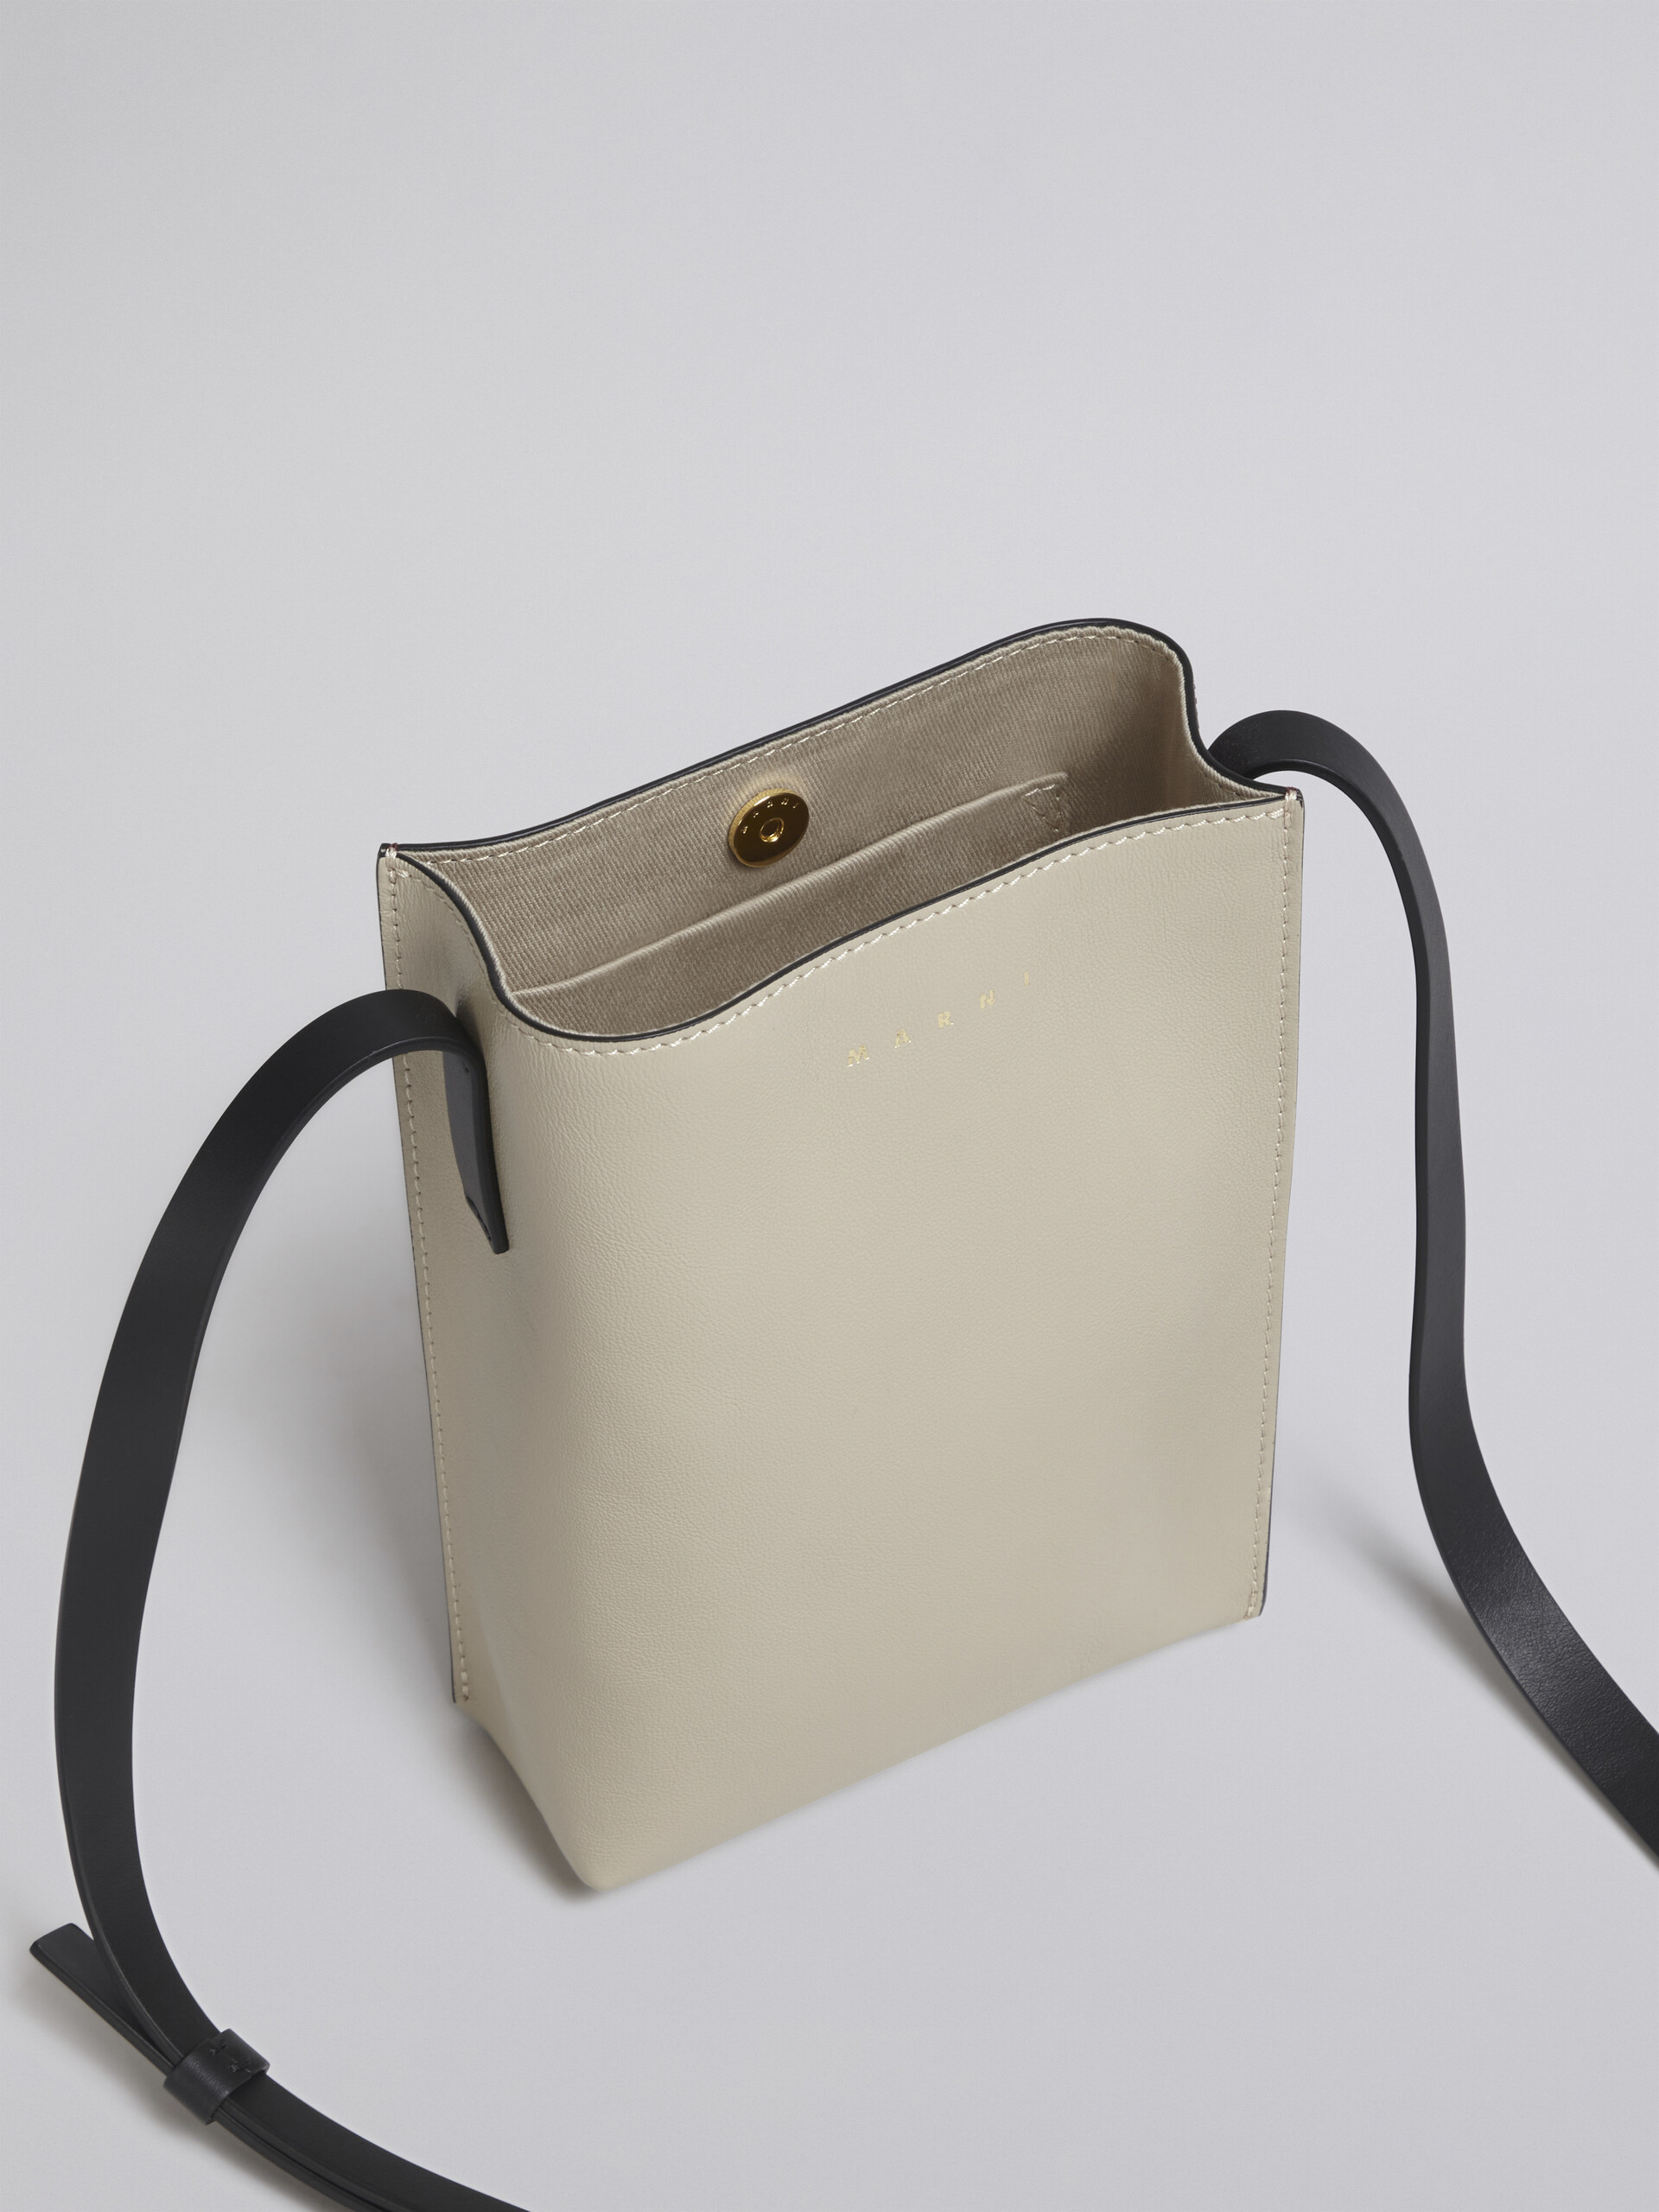 MUSEO SOFT bag in beige and red tumbled calf - Shoulder Bags - Image 2